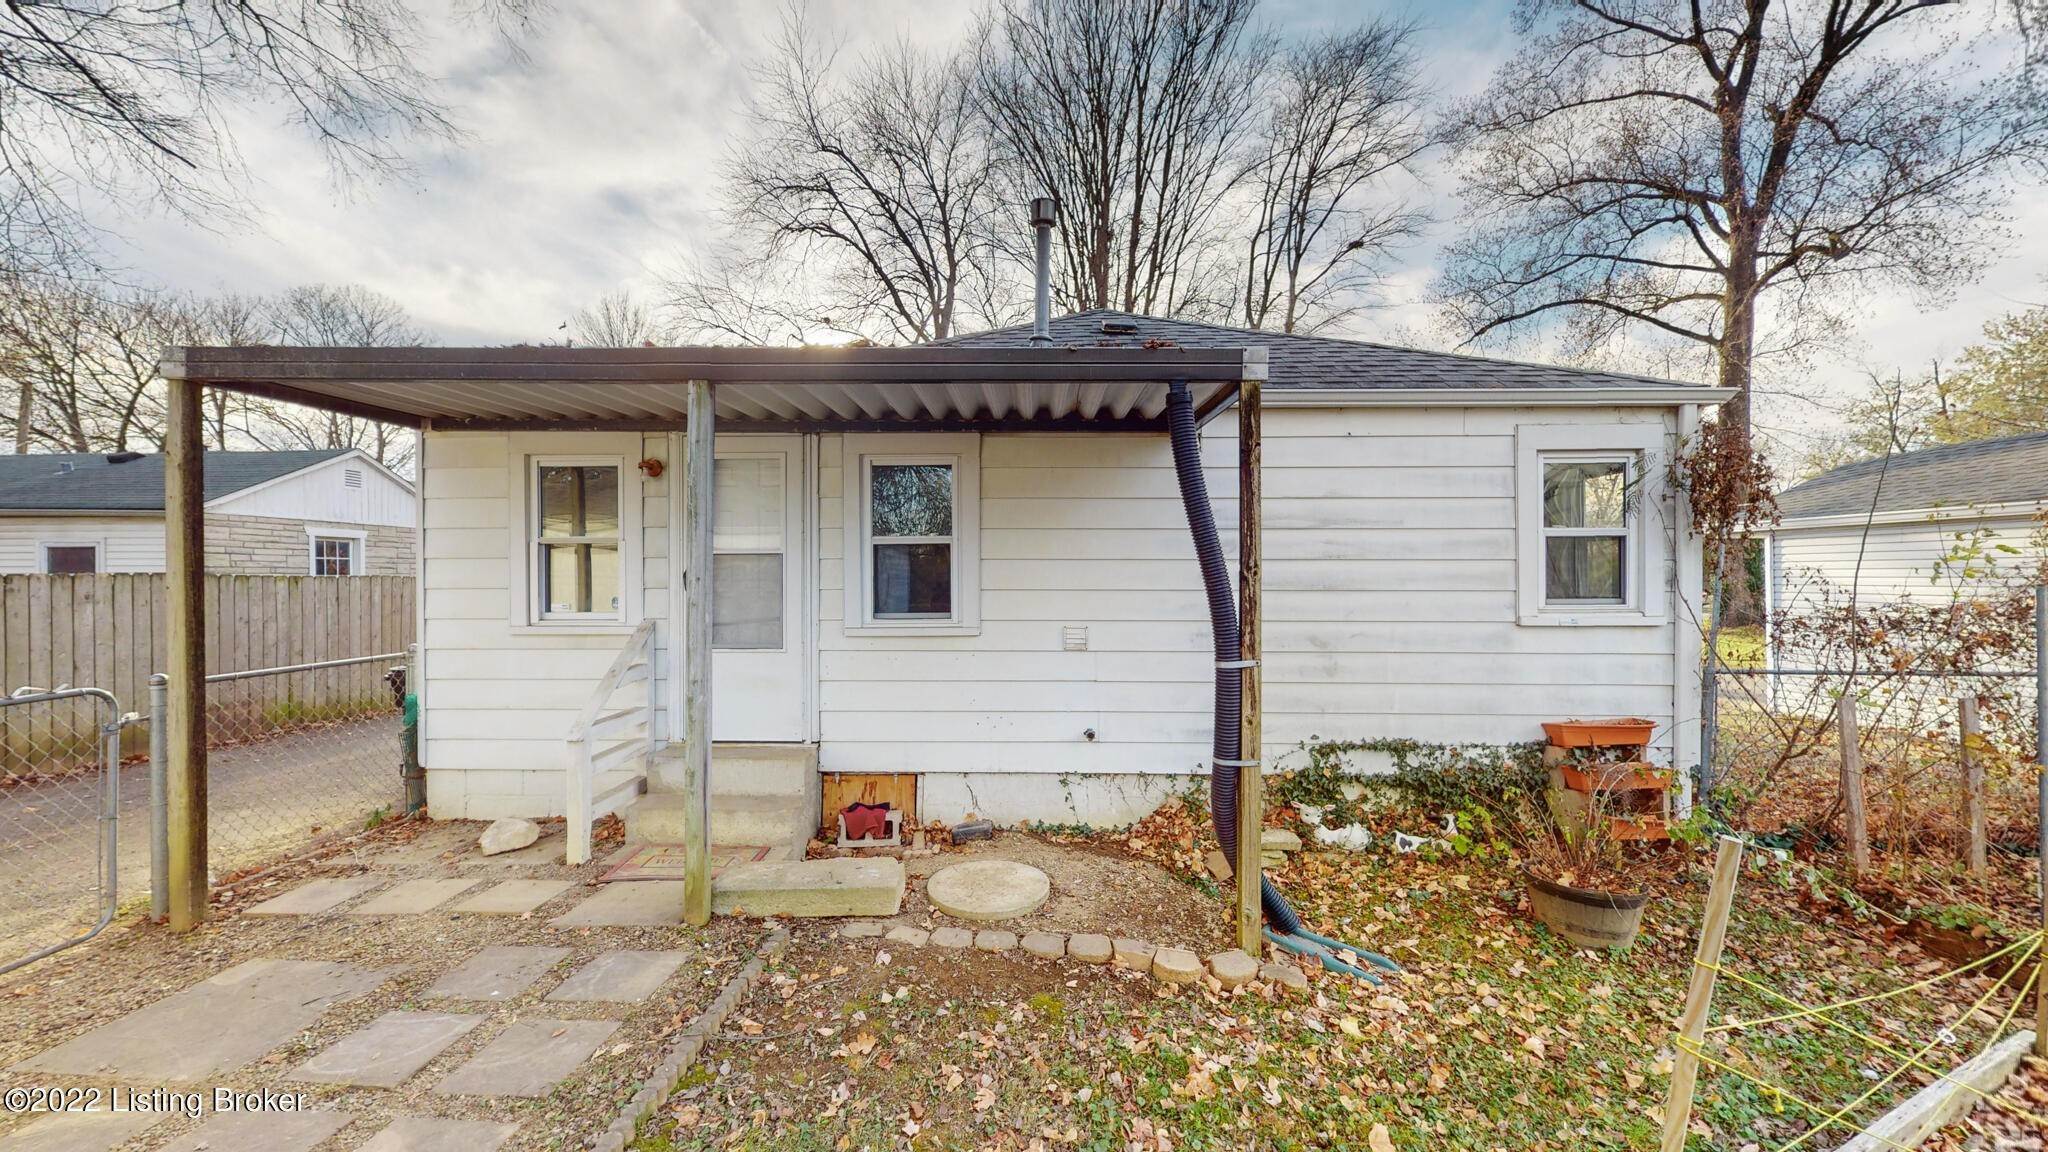 34. Single Family at Louisville, KY 40213